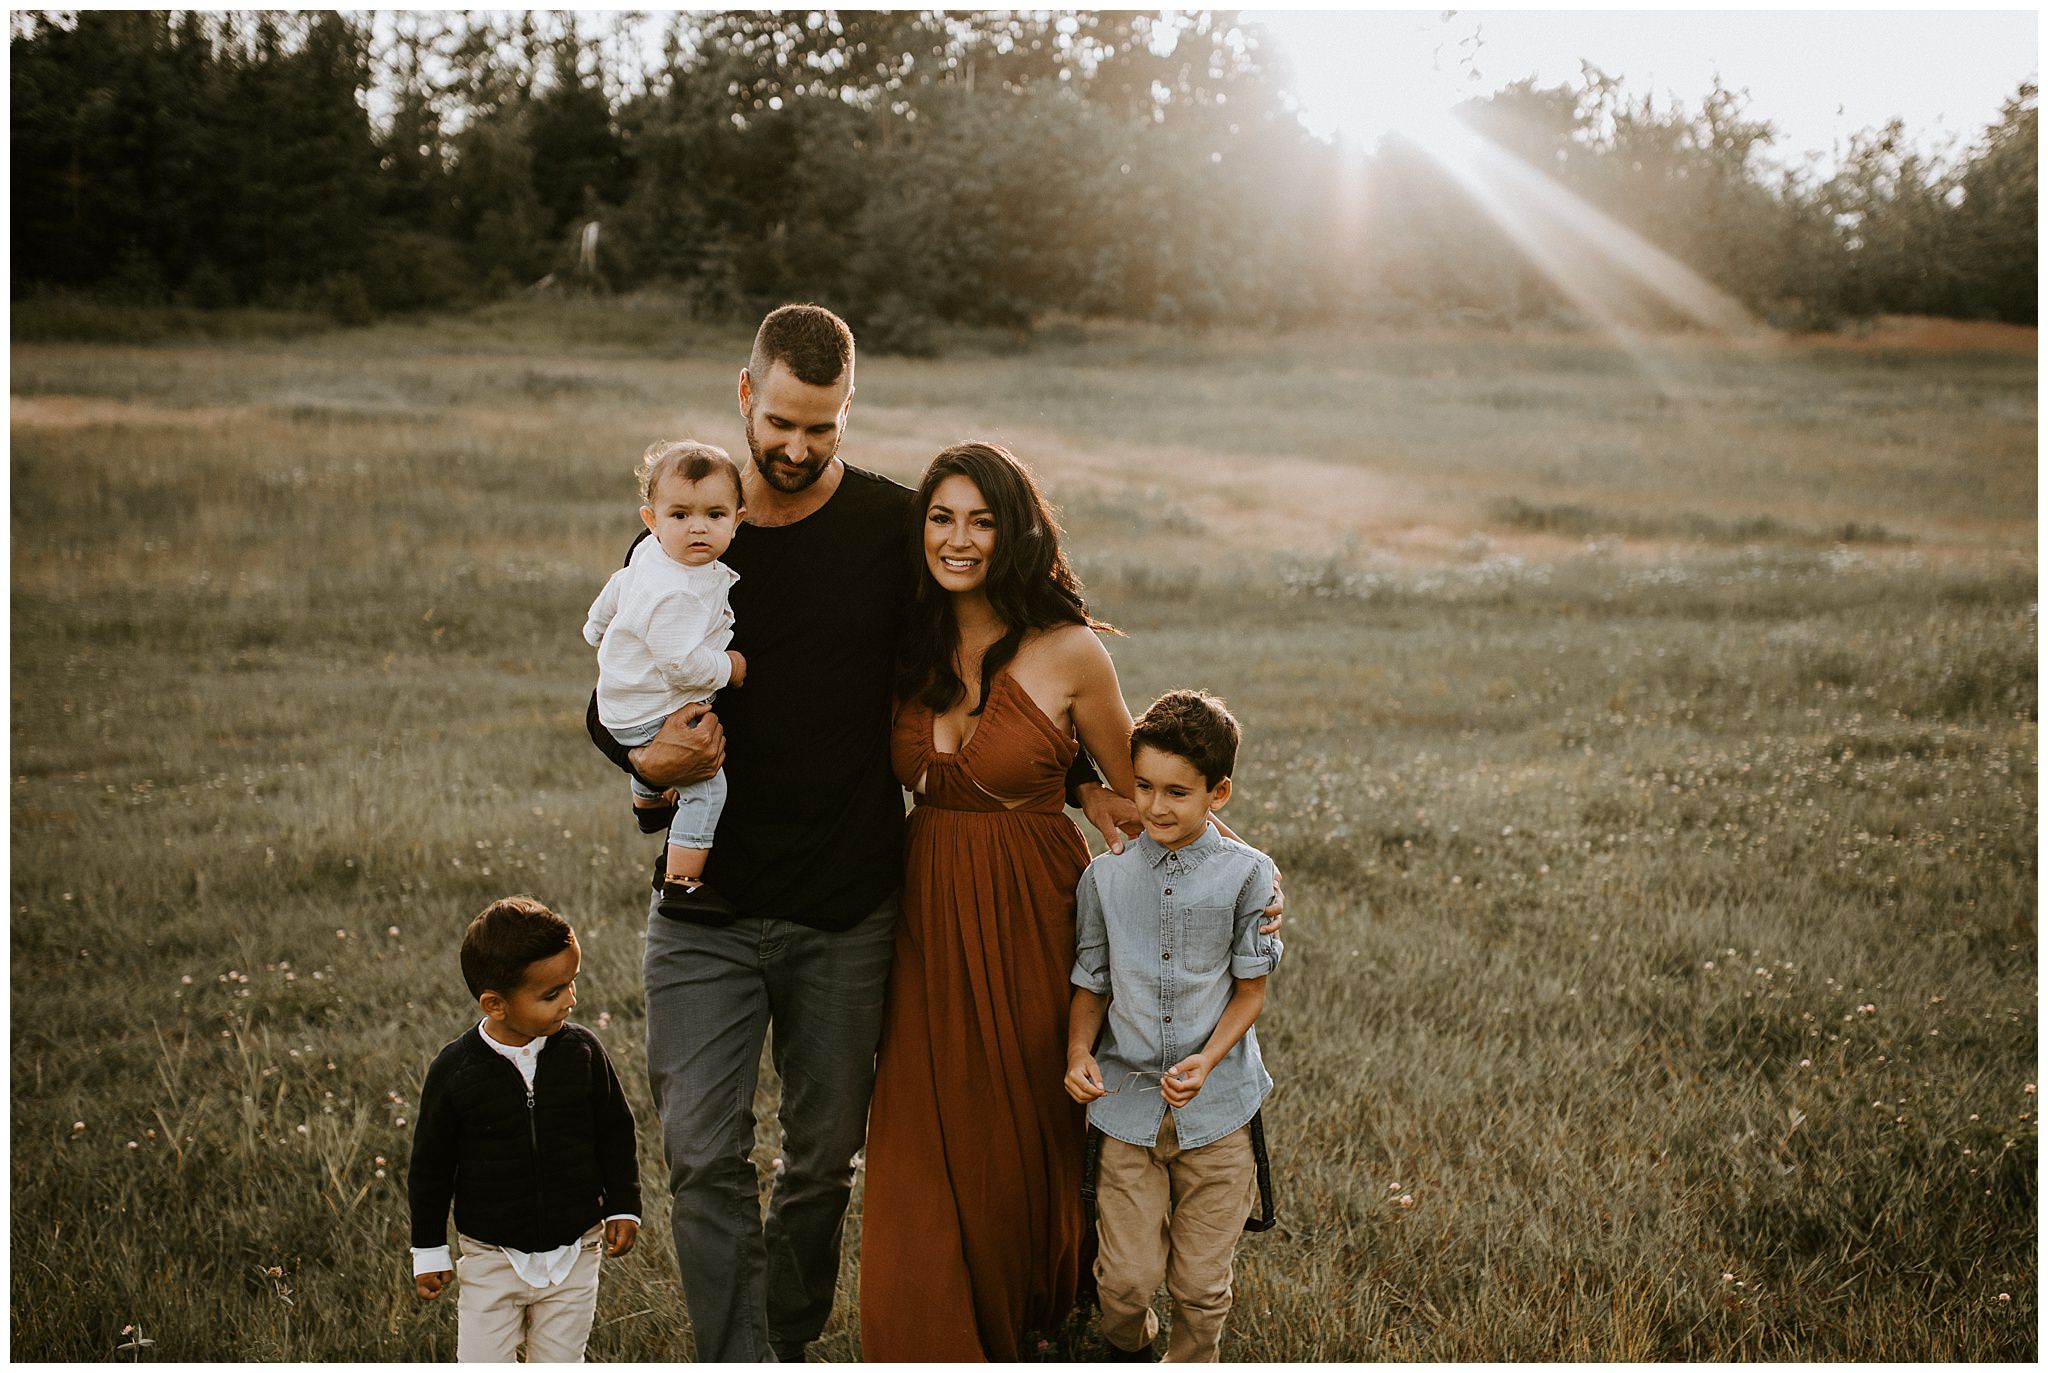 A golden hour family photoshoot in Langley